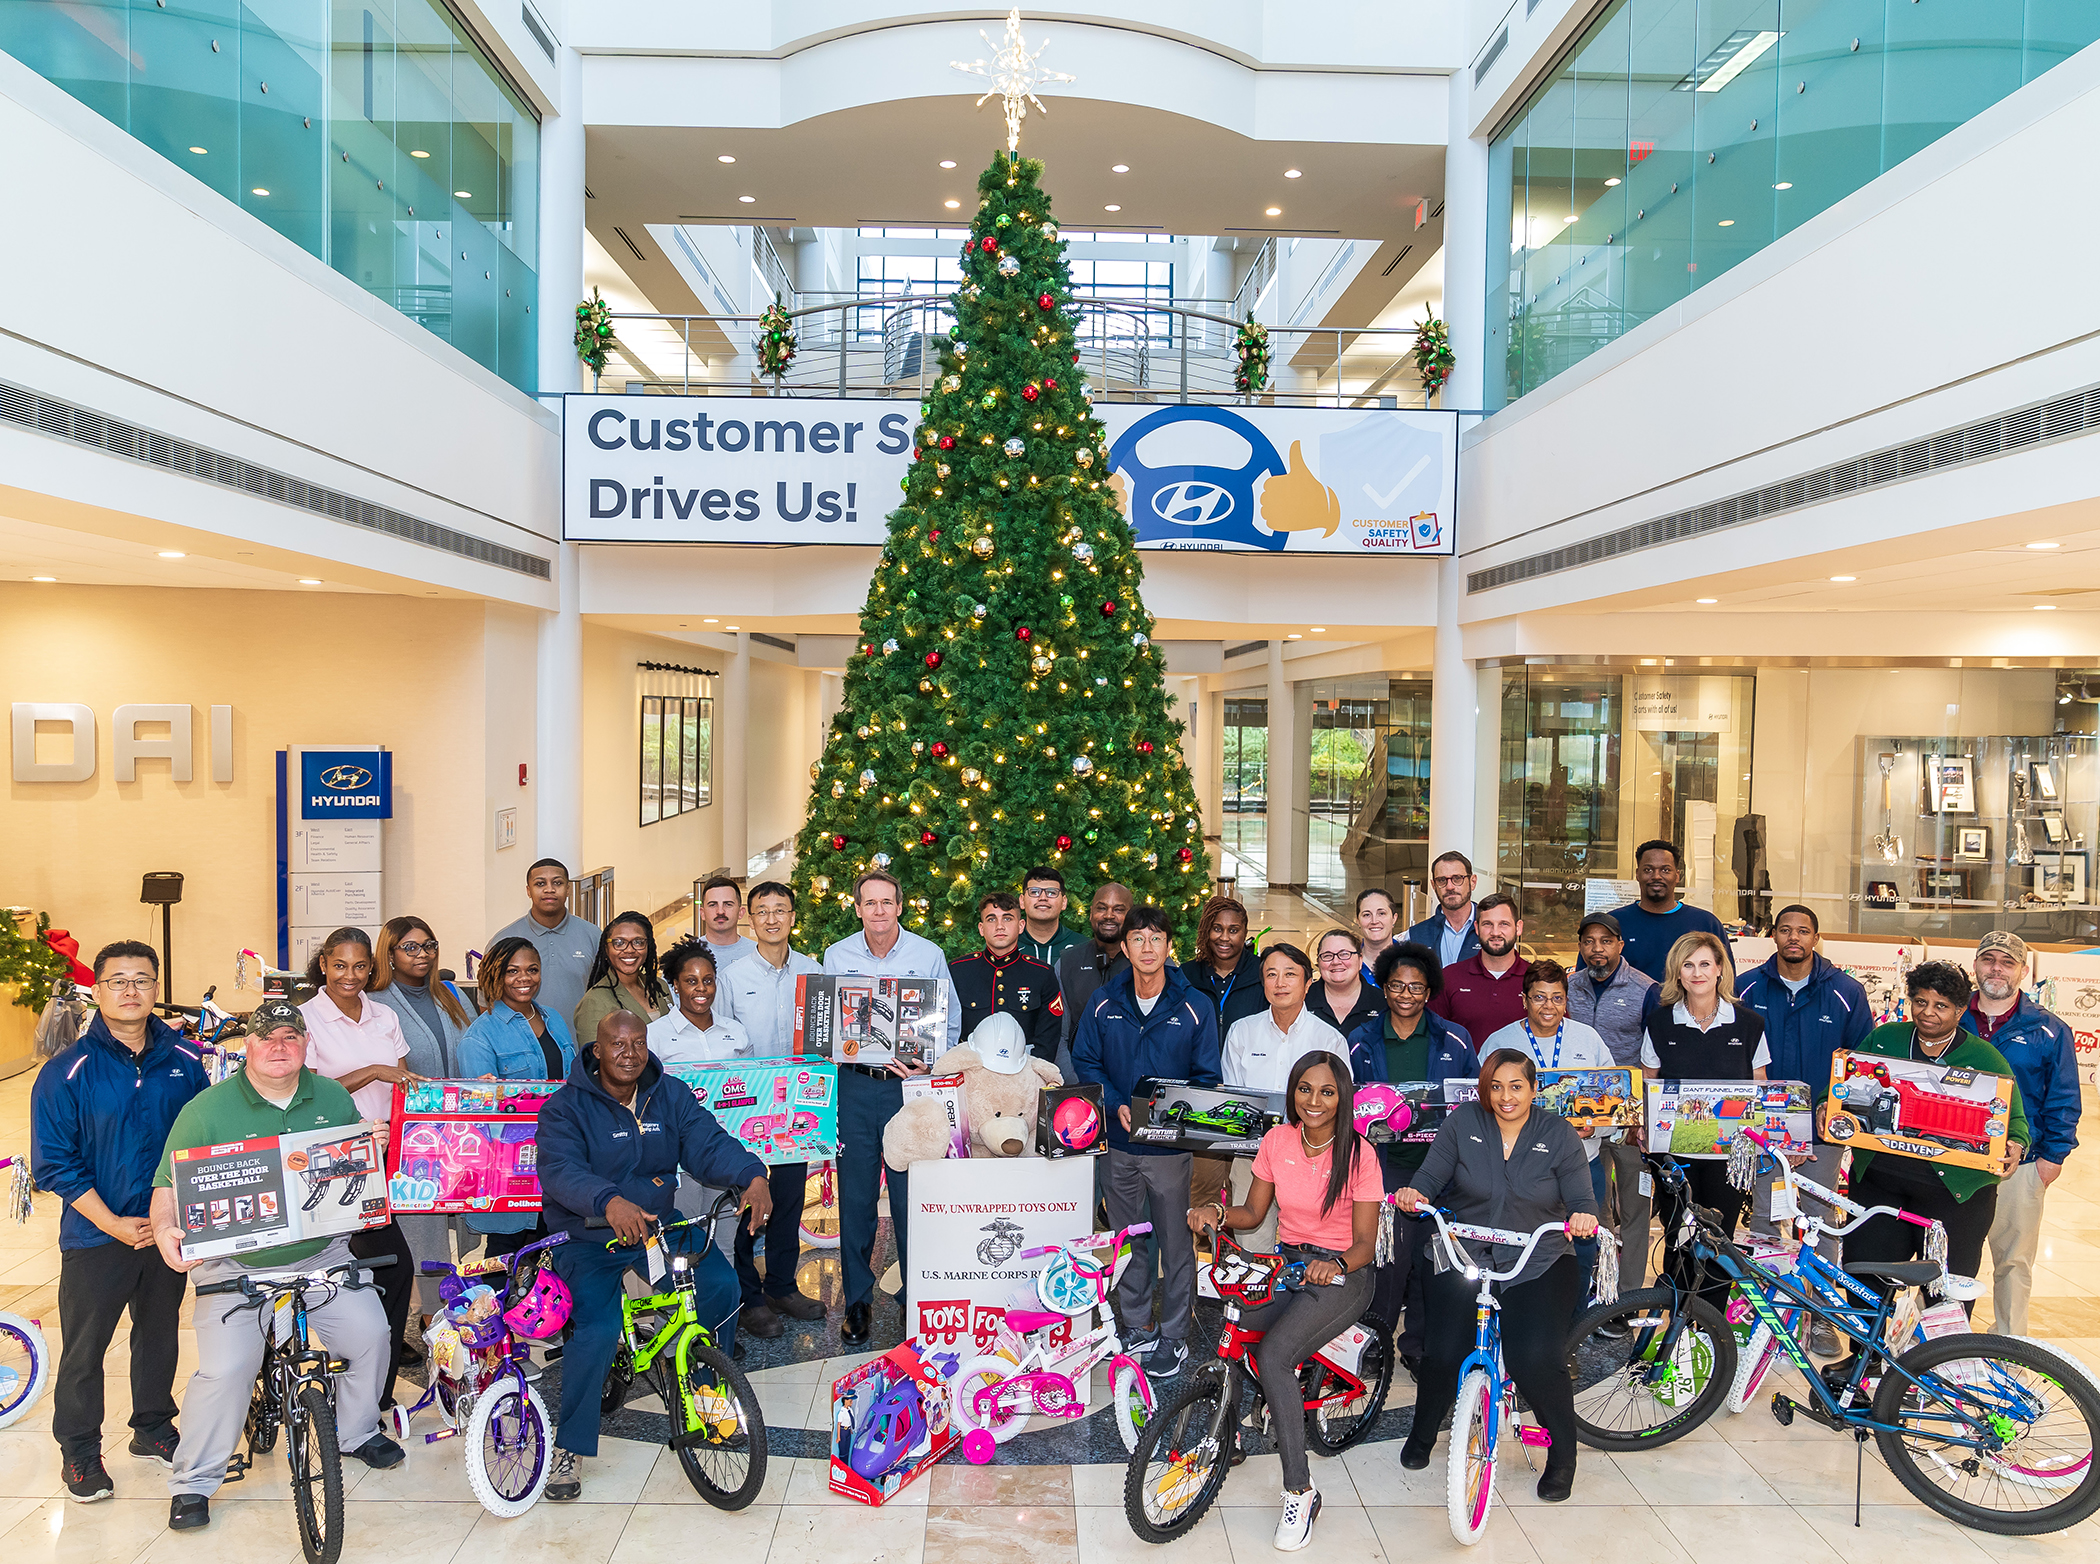 HMMA TEAM MEMBERS DONATE BICYCLES AND TOYS TO MARINE CORPS TOYS FOR TOTS AND MONTGOMERY HOUSING AUTHORITY